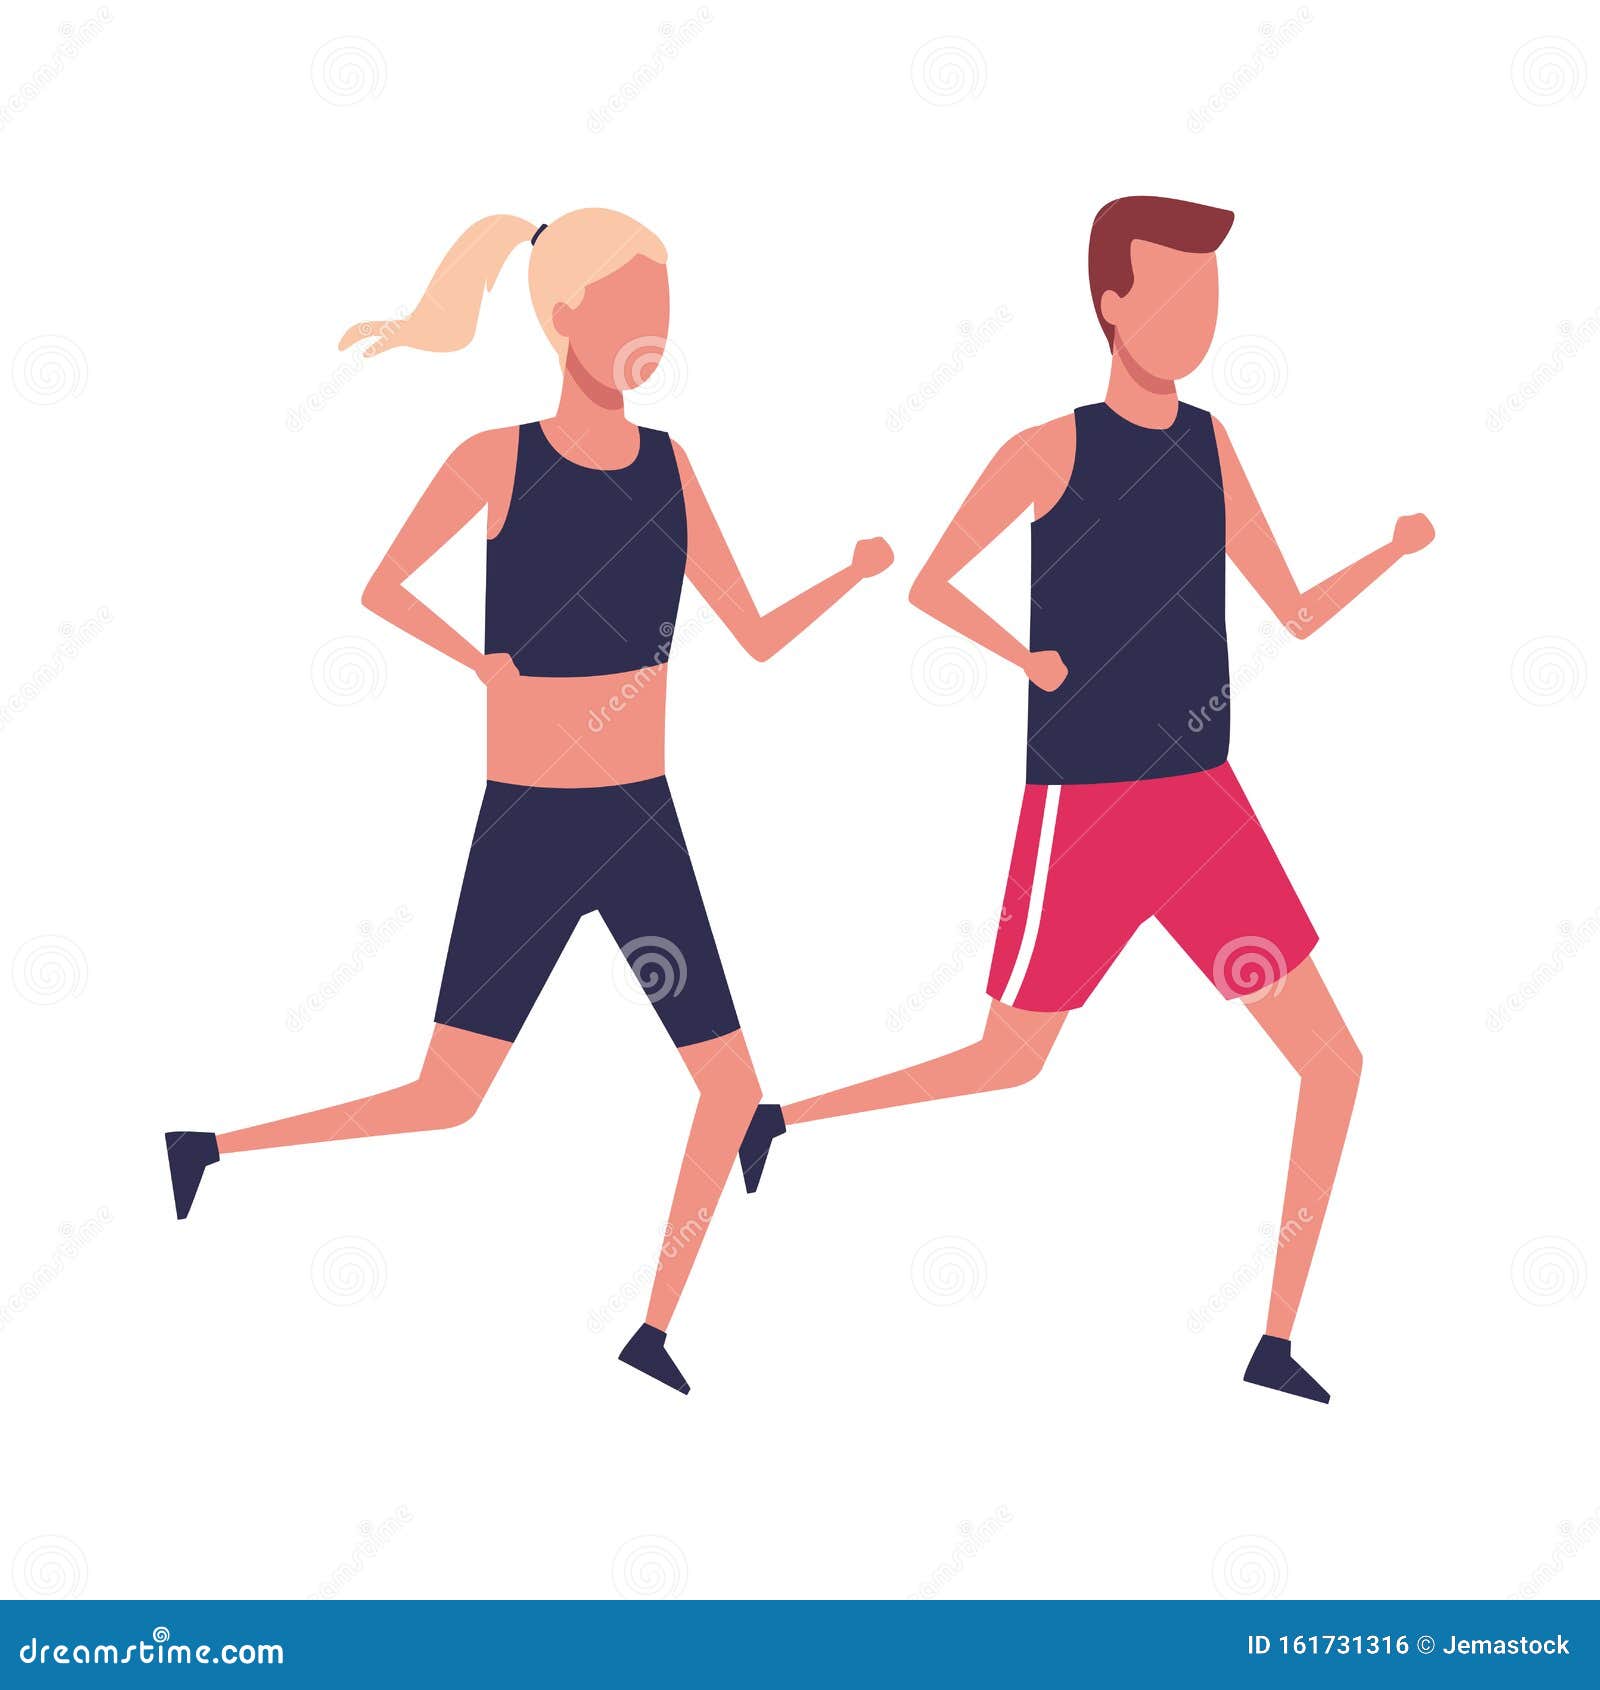 Avatar Man and Woman Running, Colorful Design Stock Vector ...